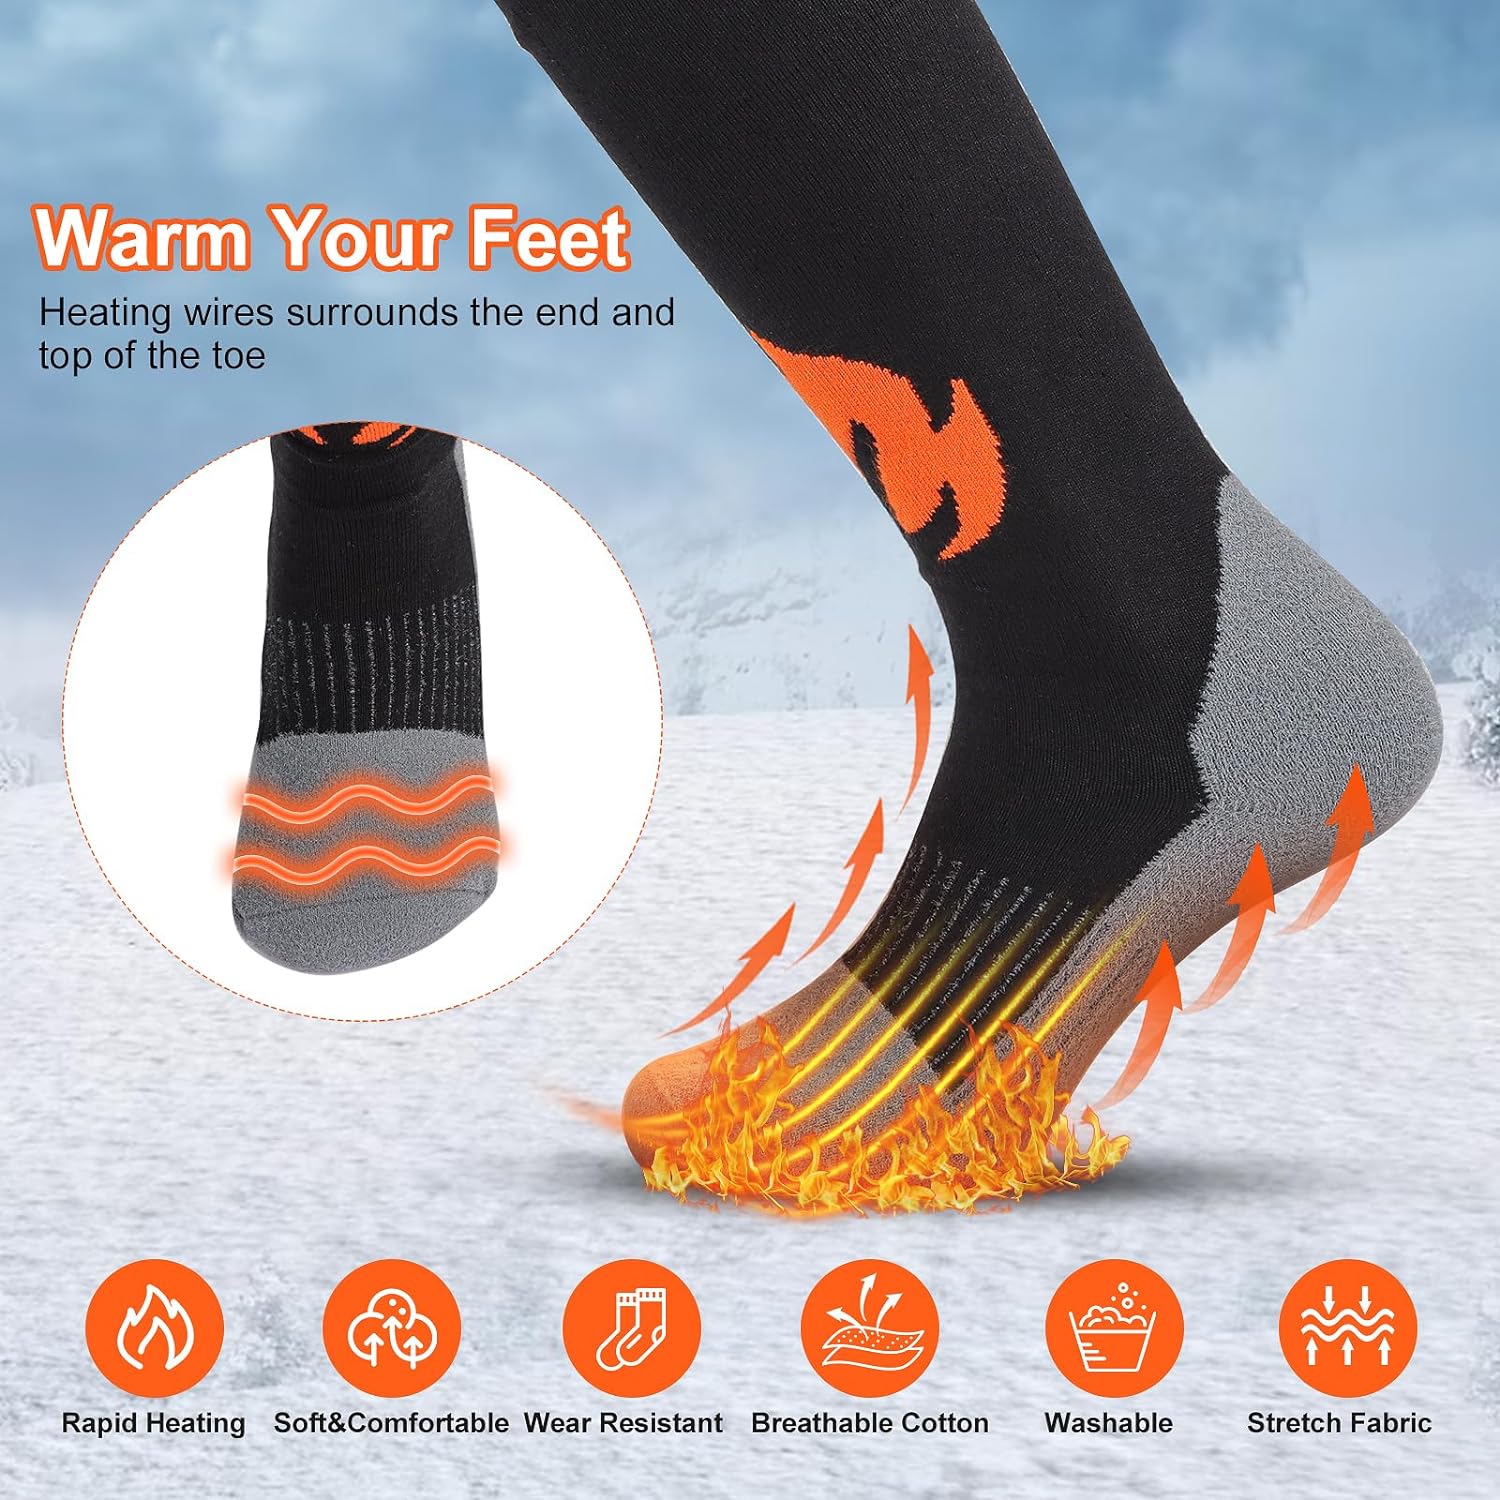 Rechargeable Heated Socks for Men Women 5000mAh Electric Socks with App Control HUIJUTCHEN Washable Battery Heated Socks Mobile Warming Heated Socks for Hunting Winter Skiing Outdoors (M)